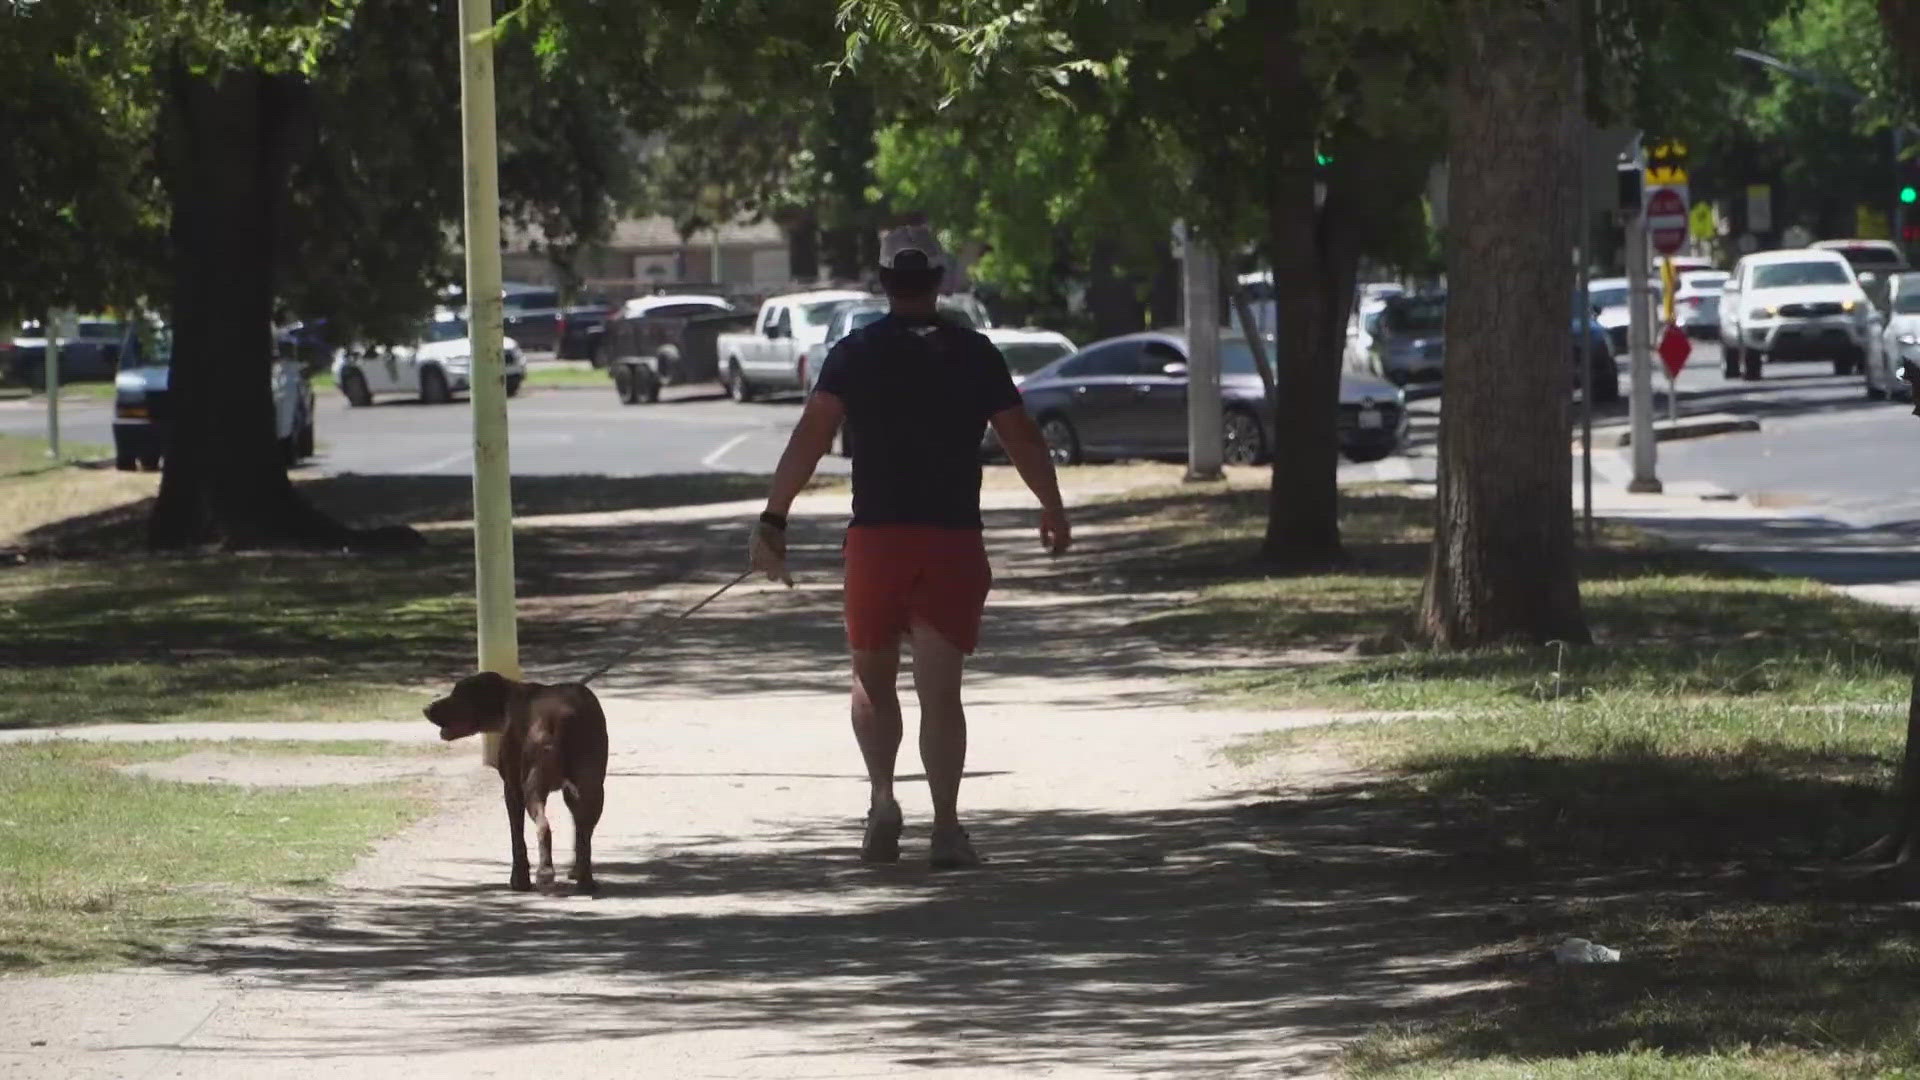 Anyone can be at risk, whether you’re a seasoned athlete or someone just walking their dog.